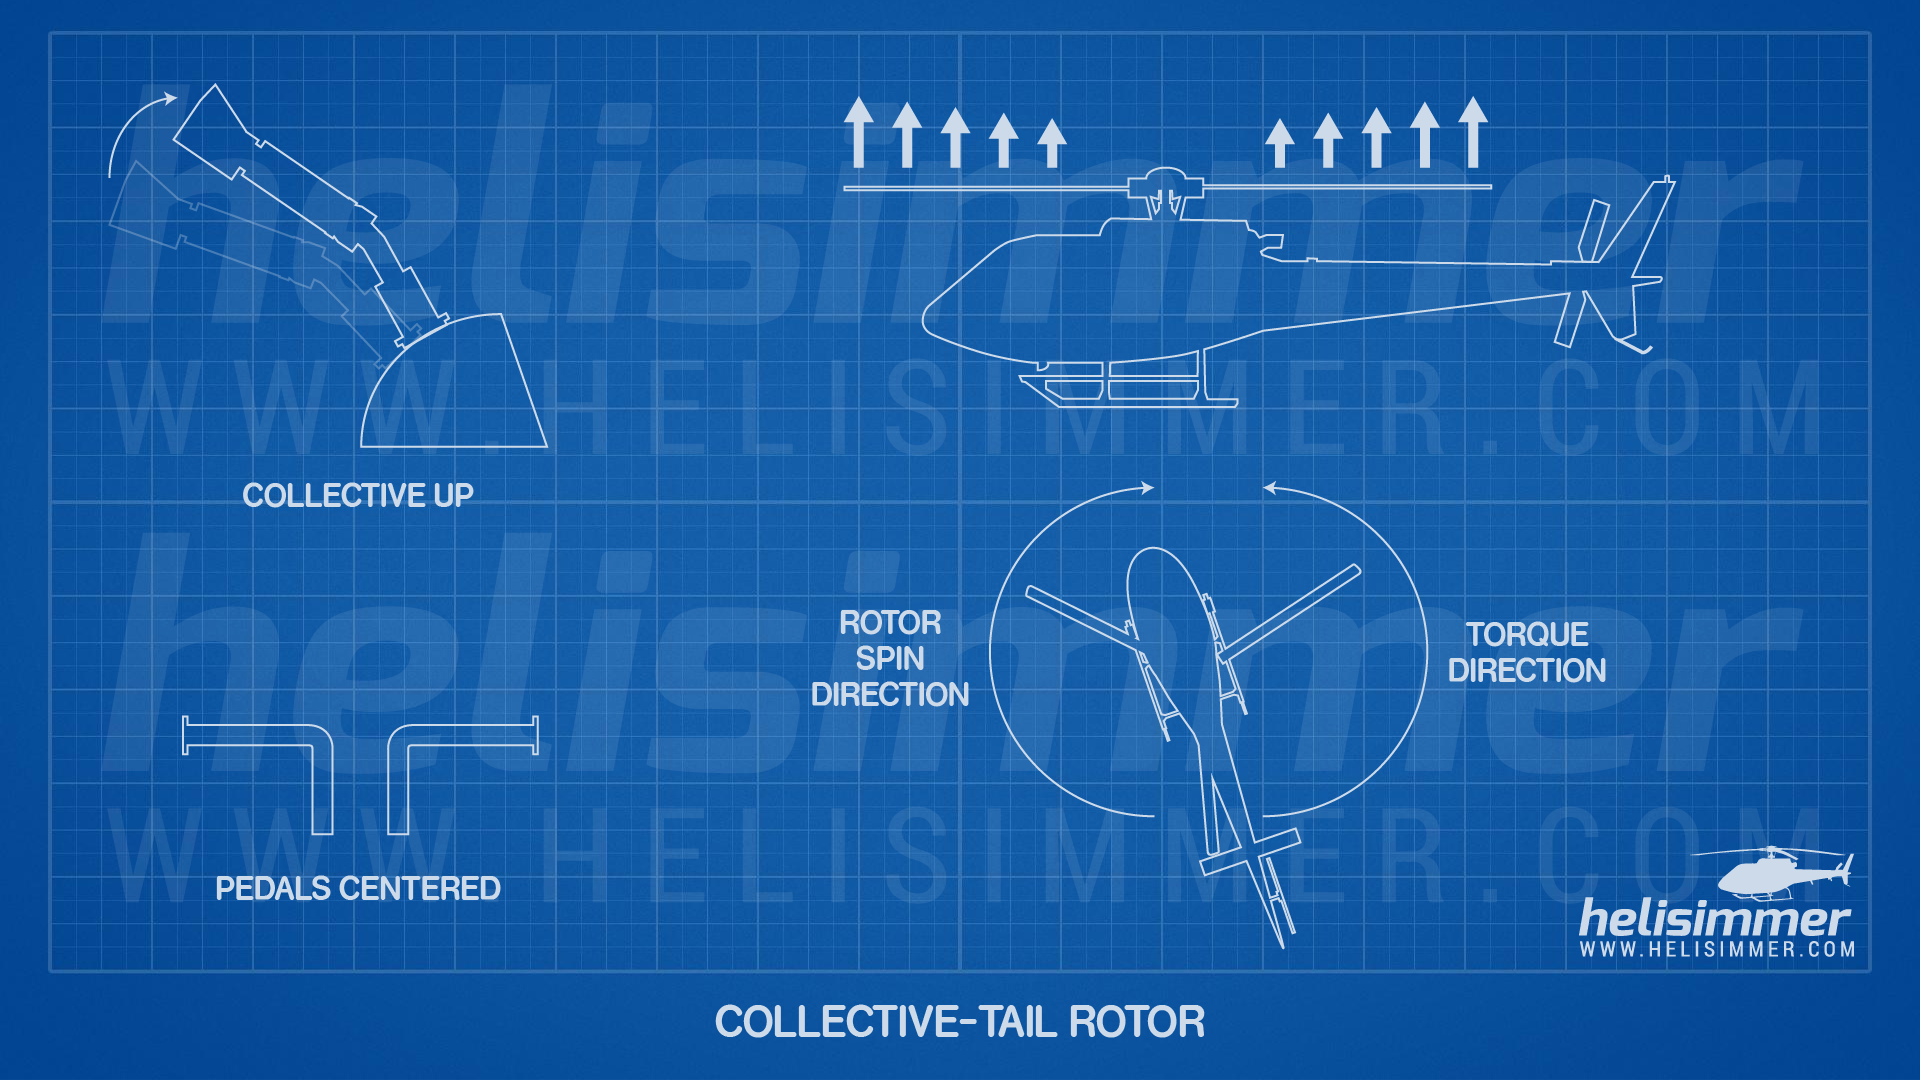 Collective/tail rotor interaction - collective up